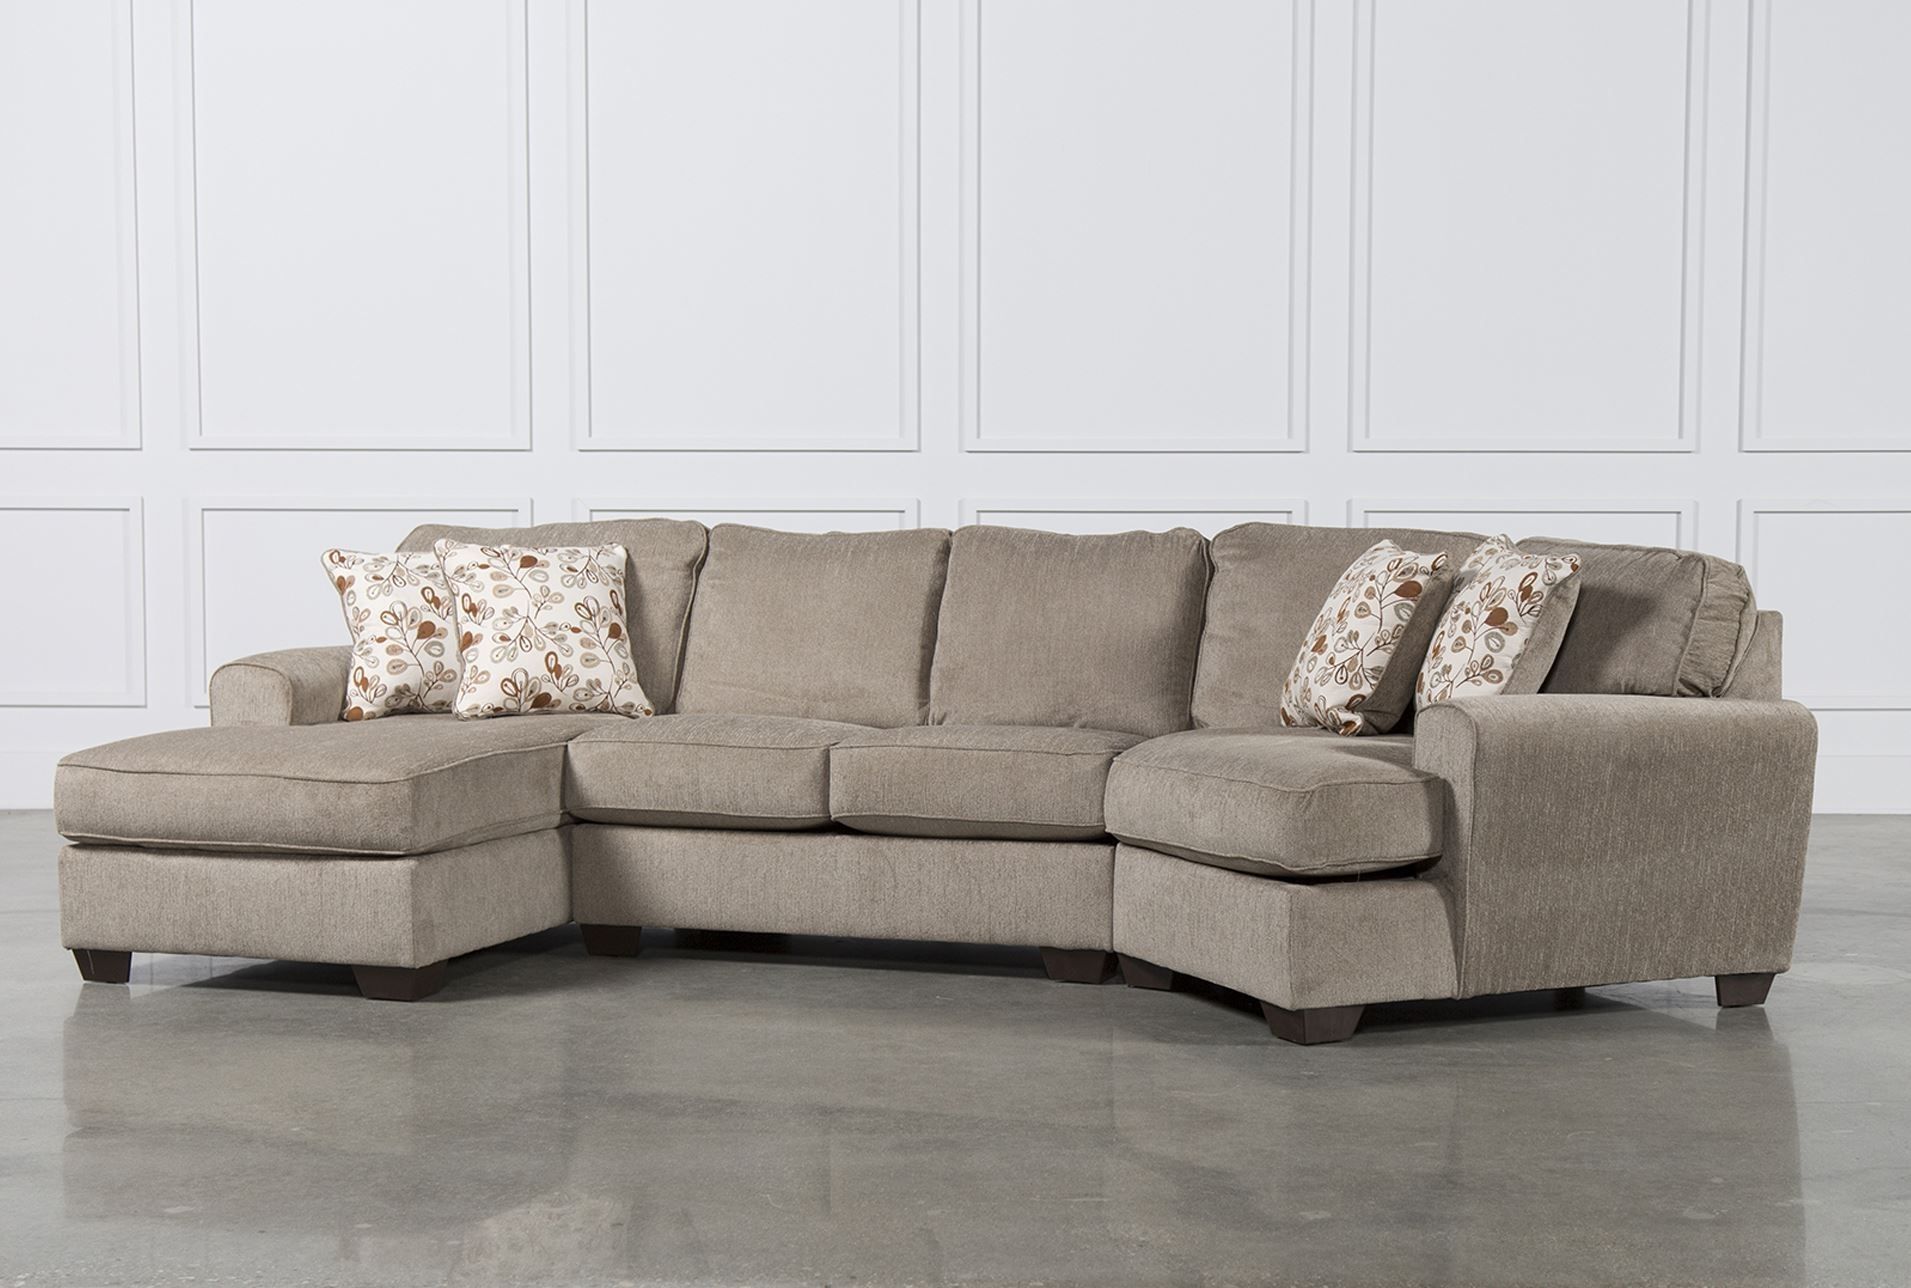 Patola Park 3 Piece Cuddler Sectional W/laf Corner Chaise With Regard To Sectional Sofas With Cuddler (Photo 1 of 10)